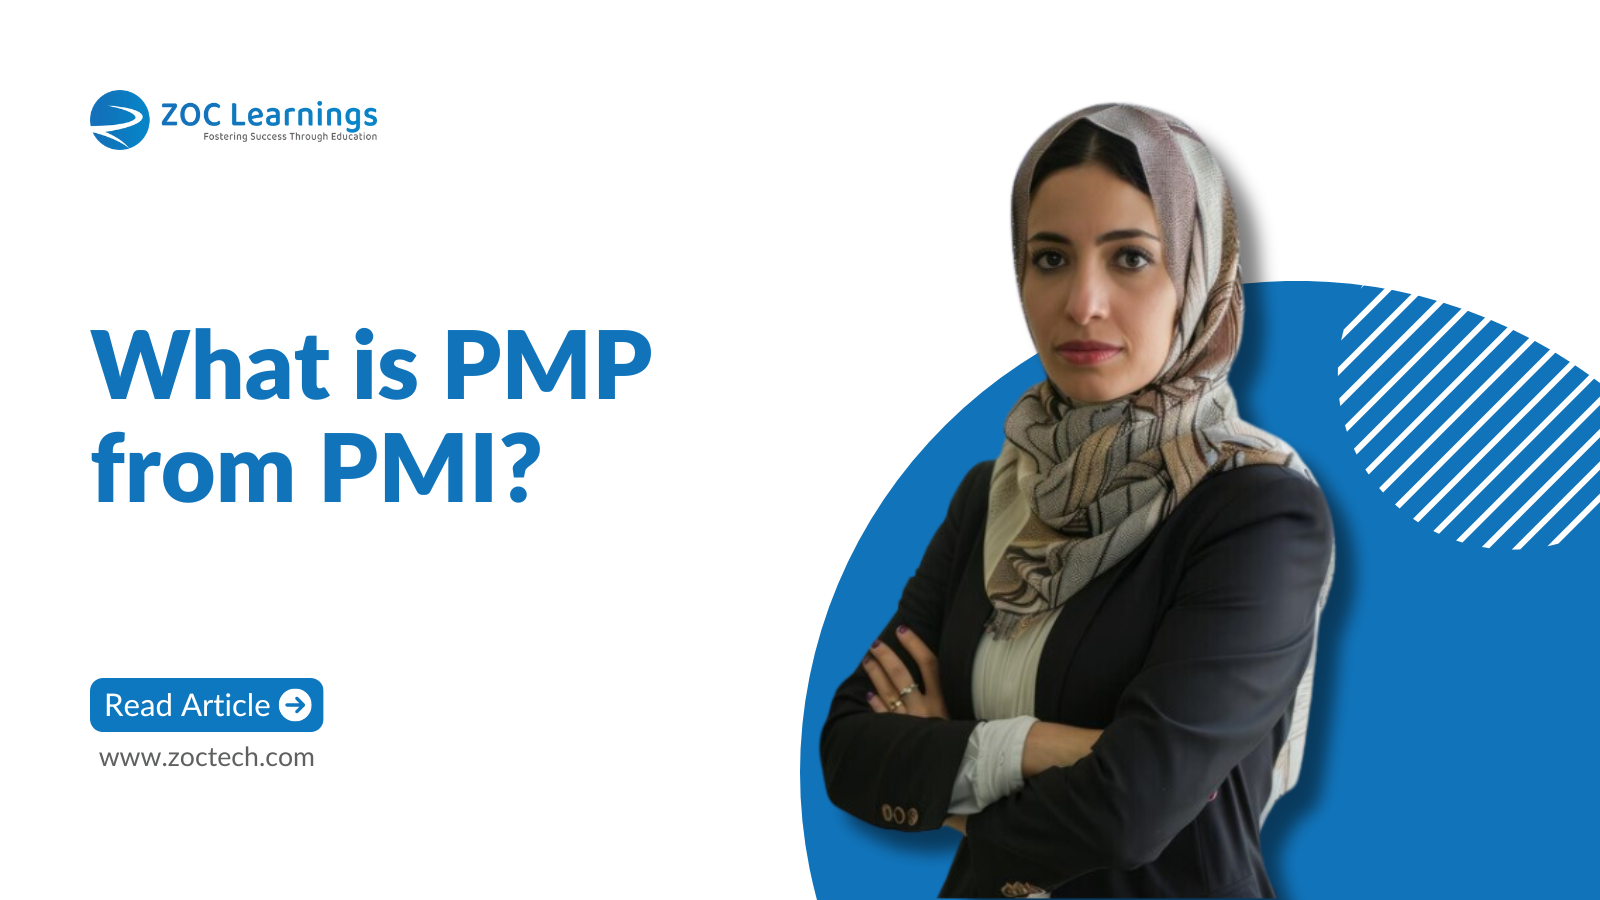 PMP from PMI